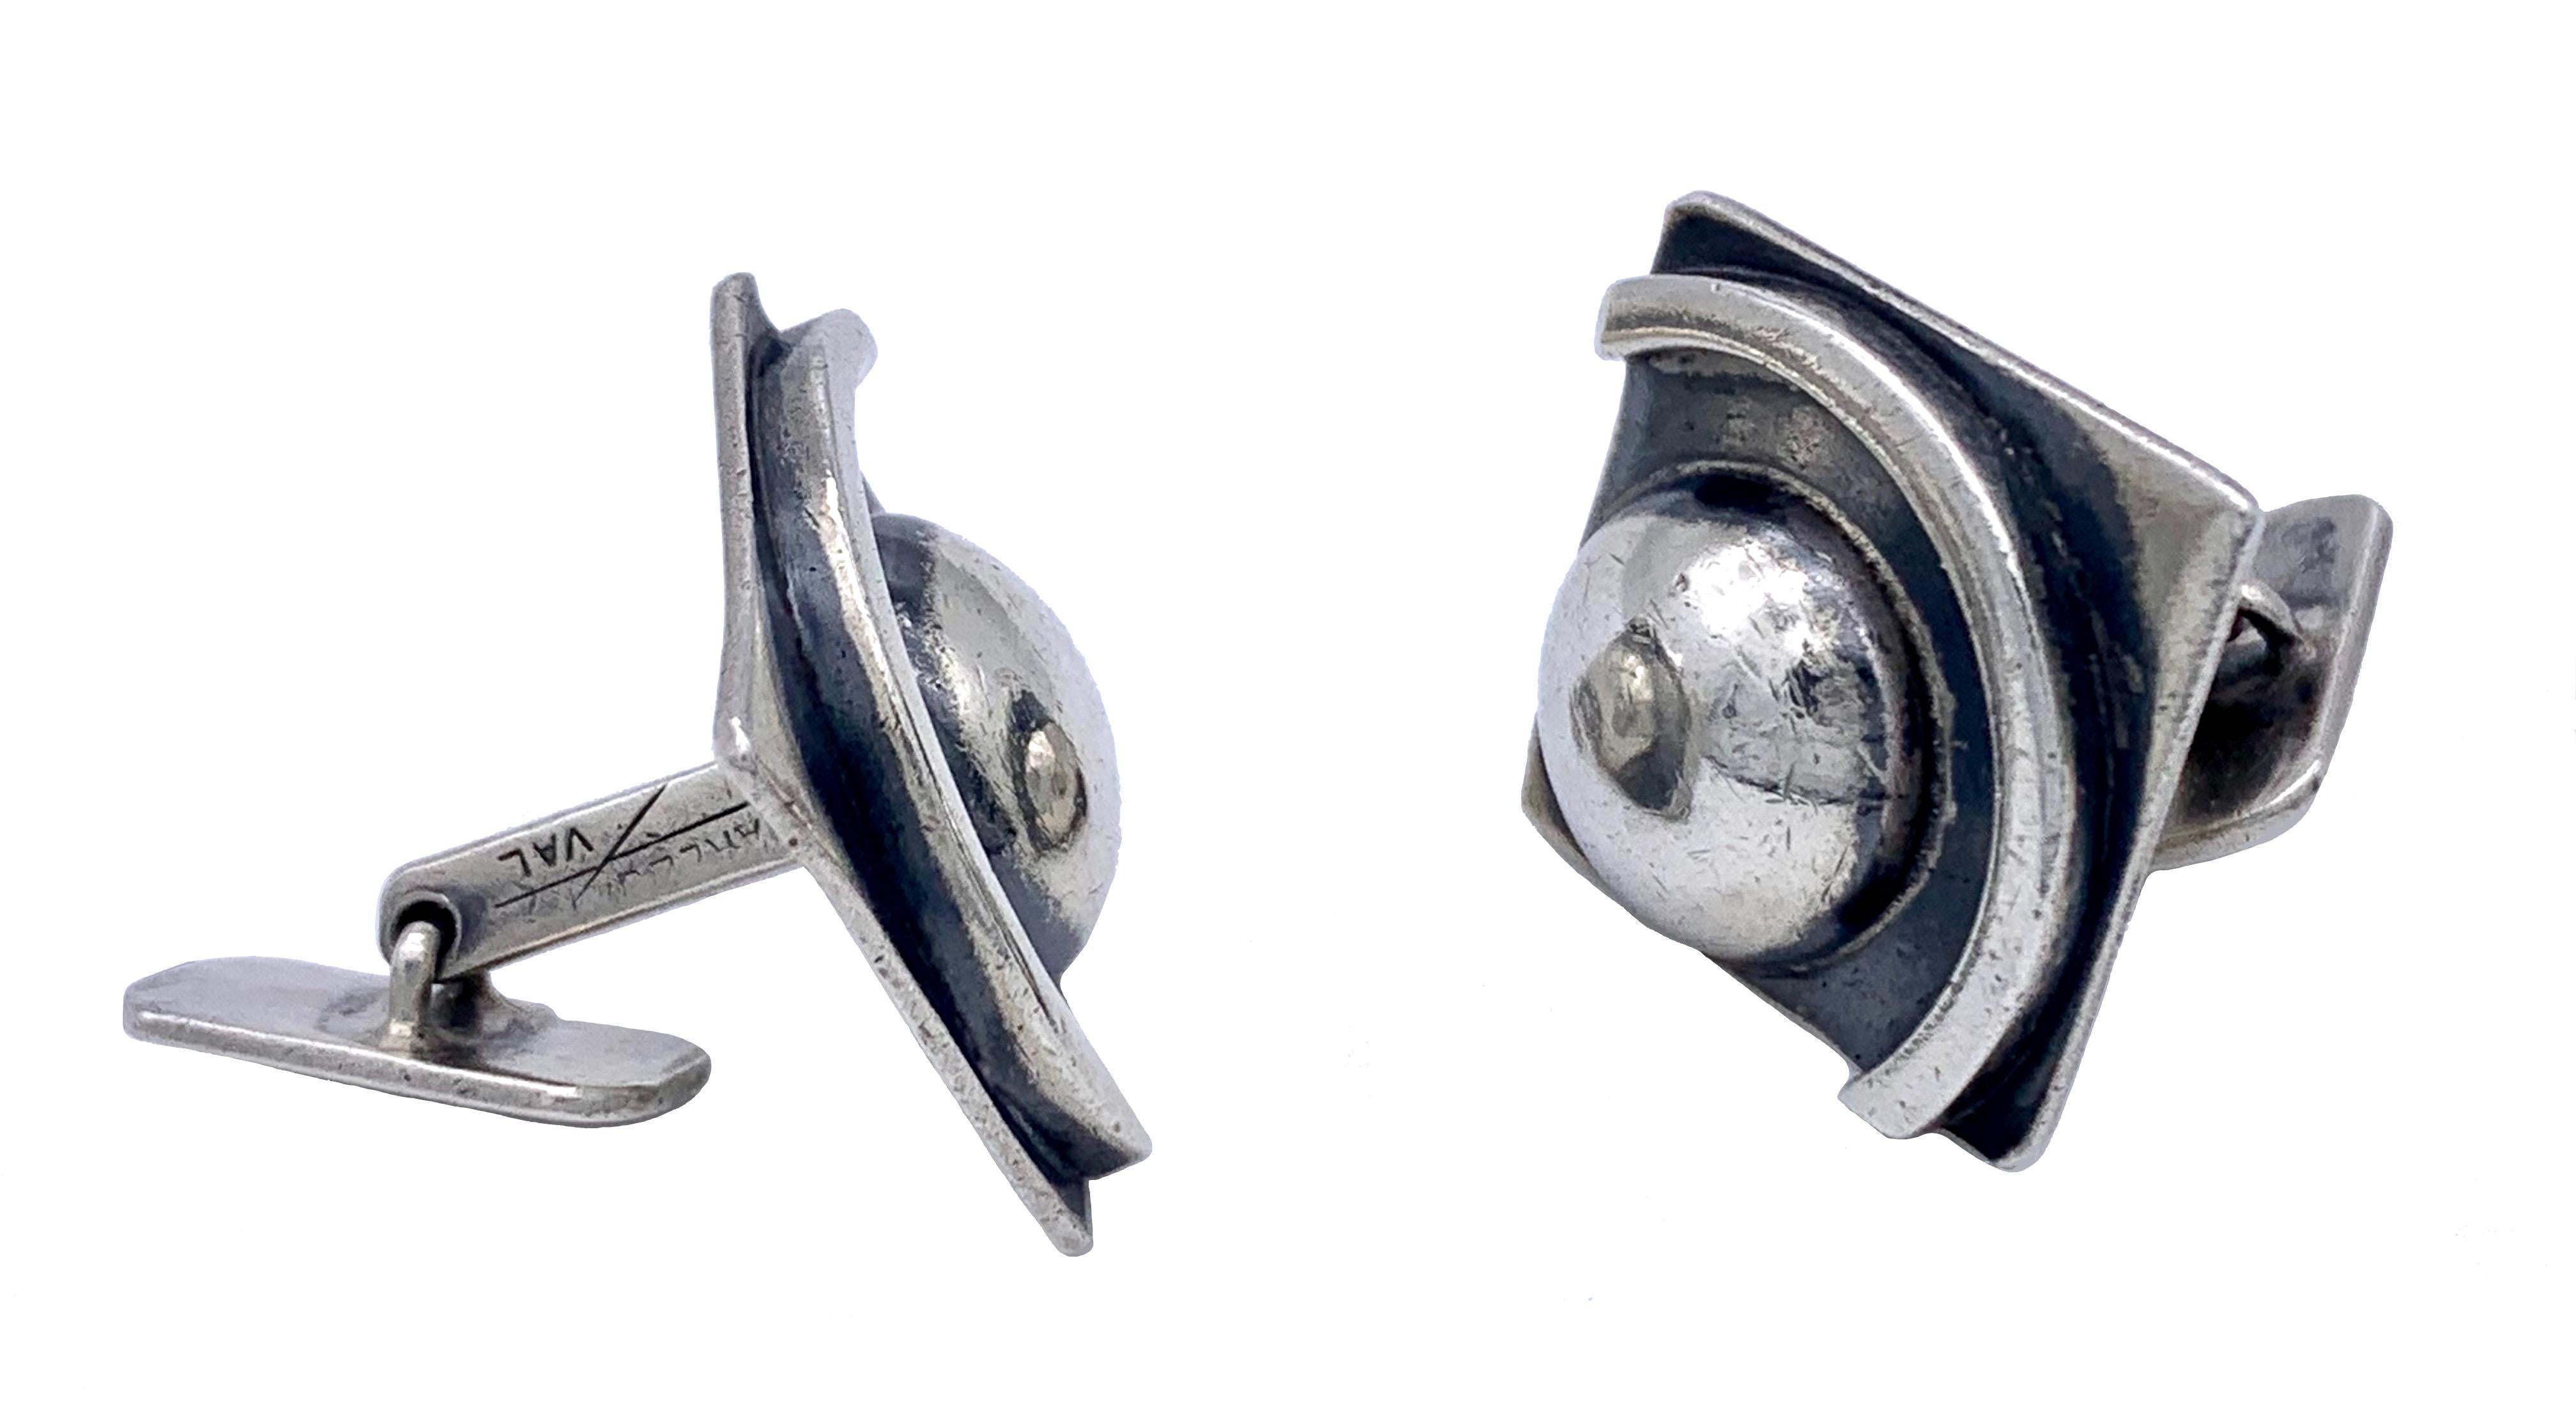 These chunky sterling silver Art Deco  cufflinks were made by Charles Val and are fully signed. According to the publication 